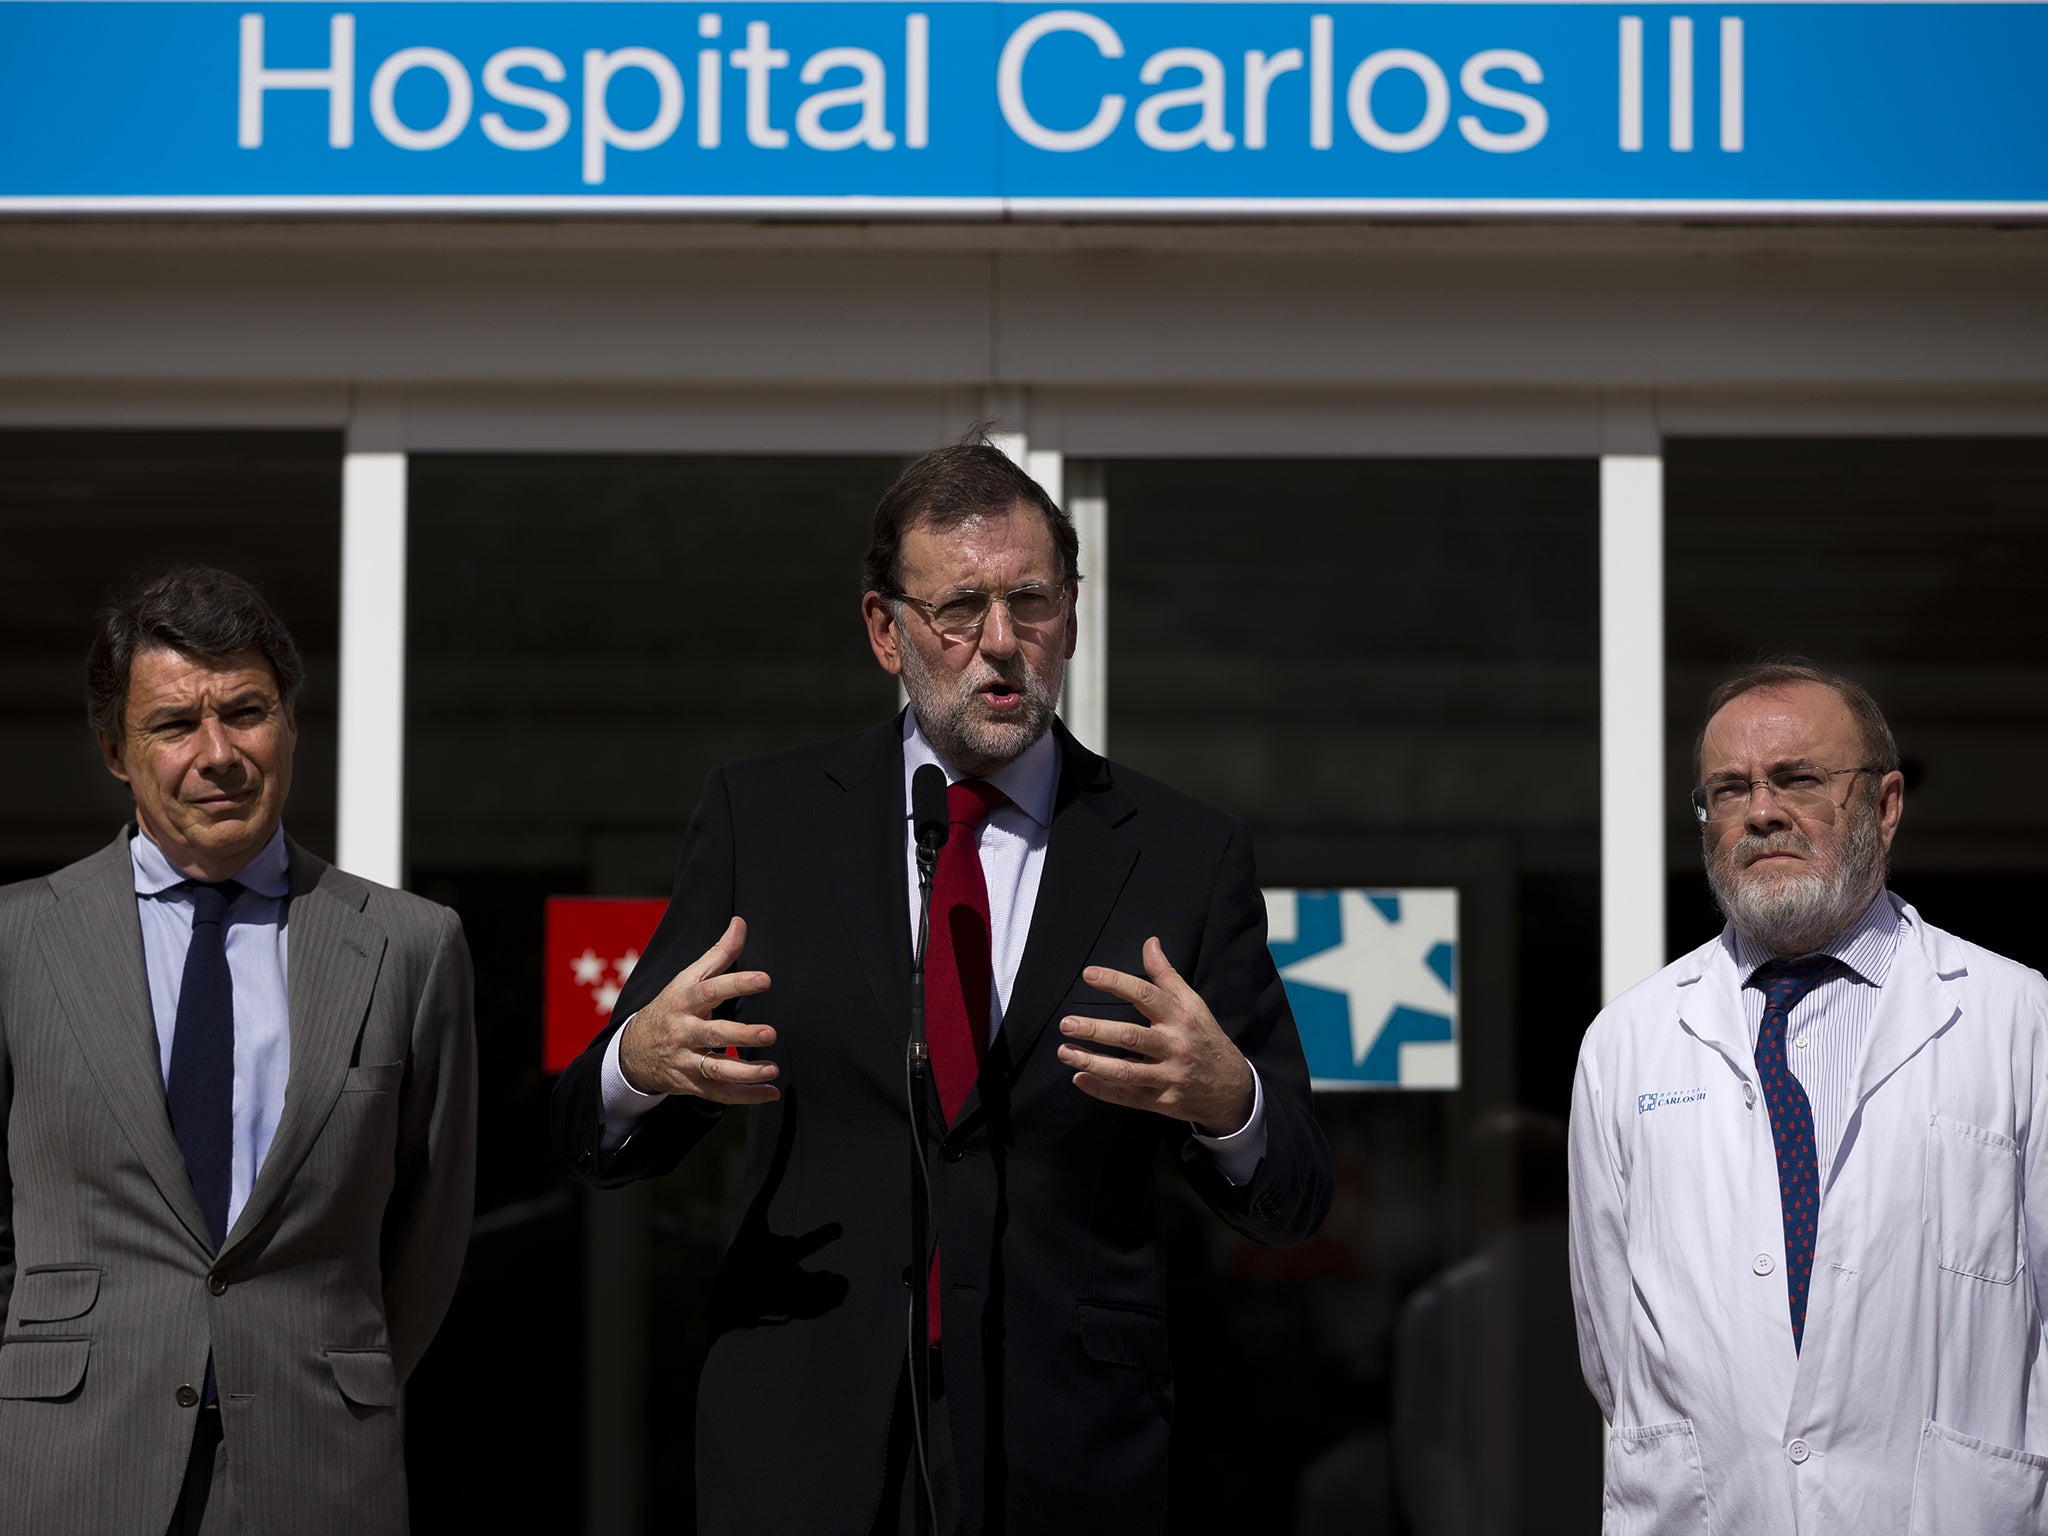 Spain's Prime Minister Mariano Rajoy speaks during his visit to the Carlos III hospital in Madrid, Spain